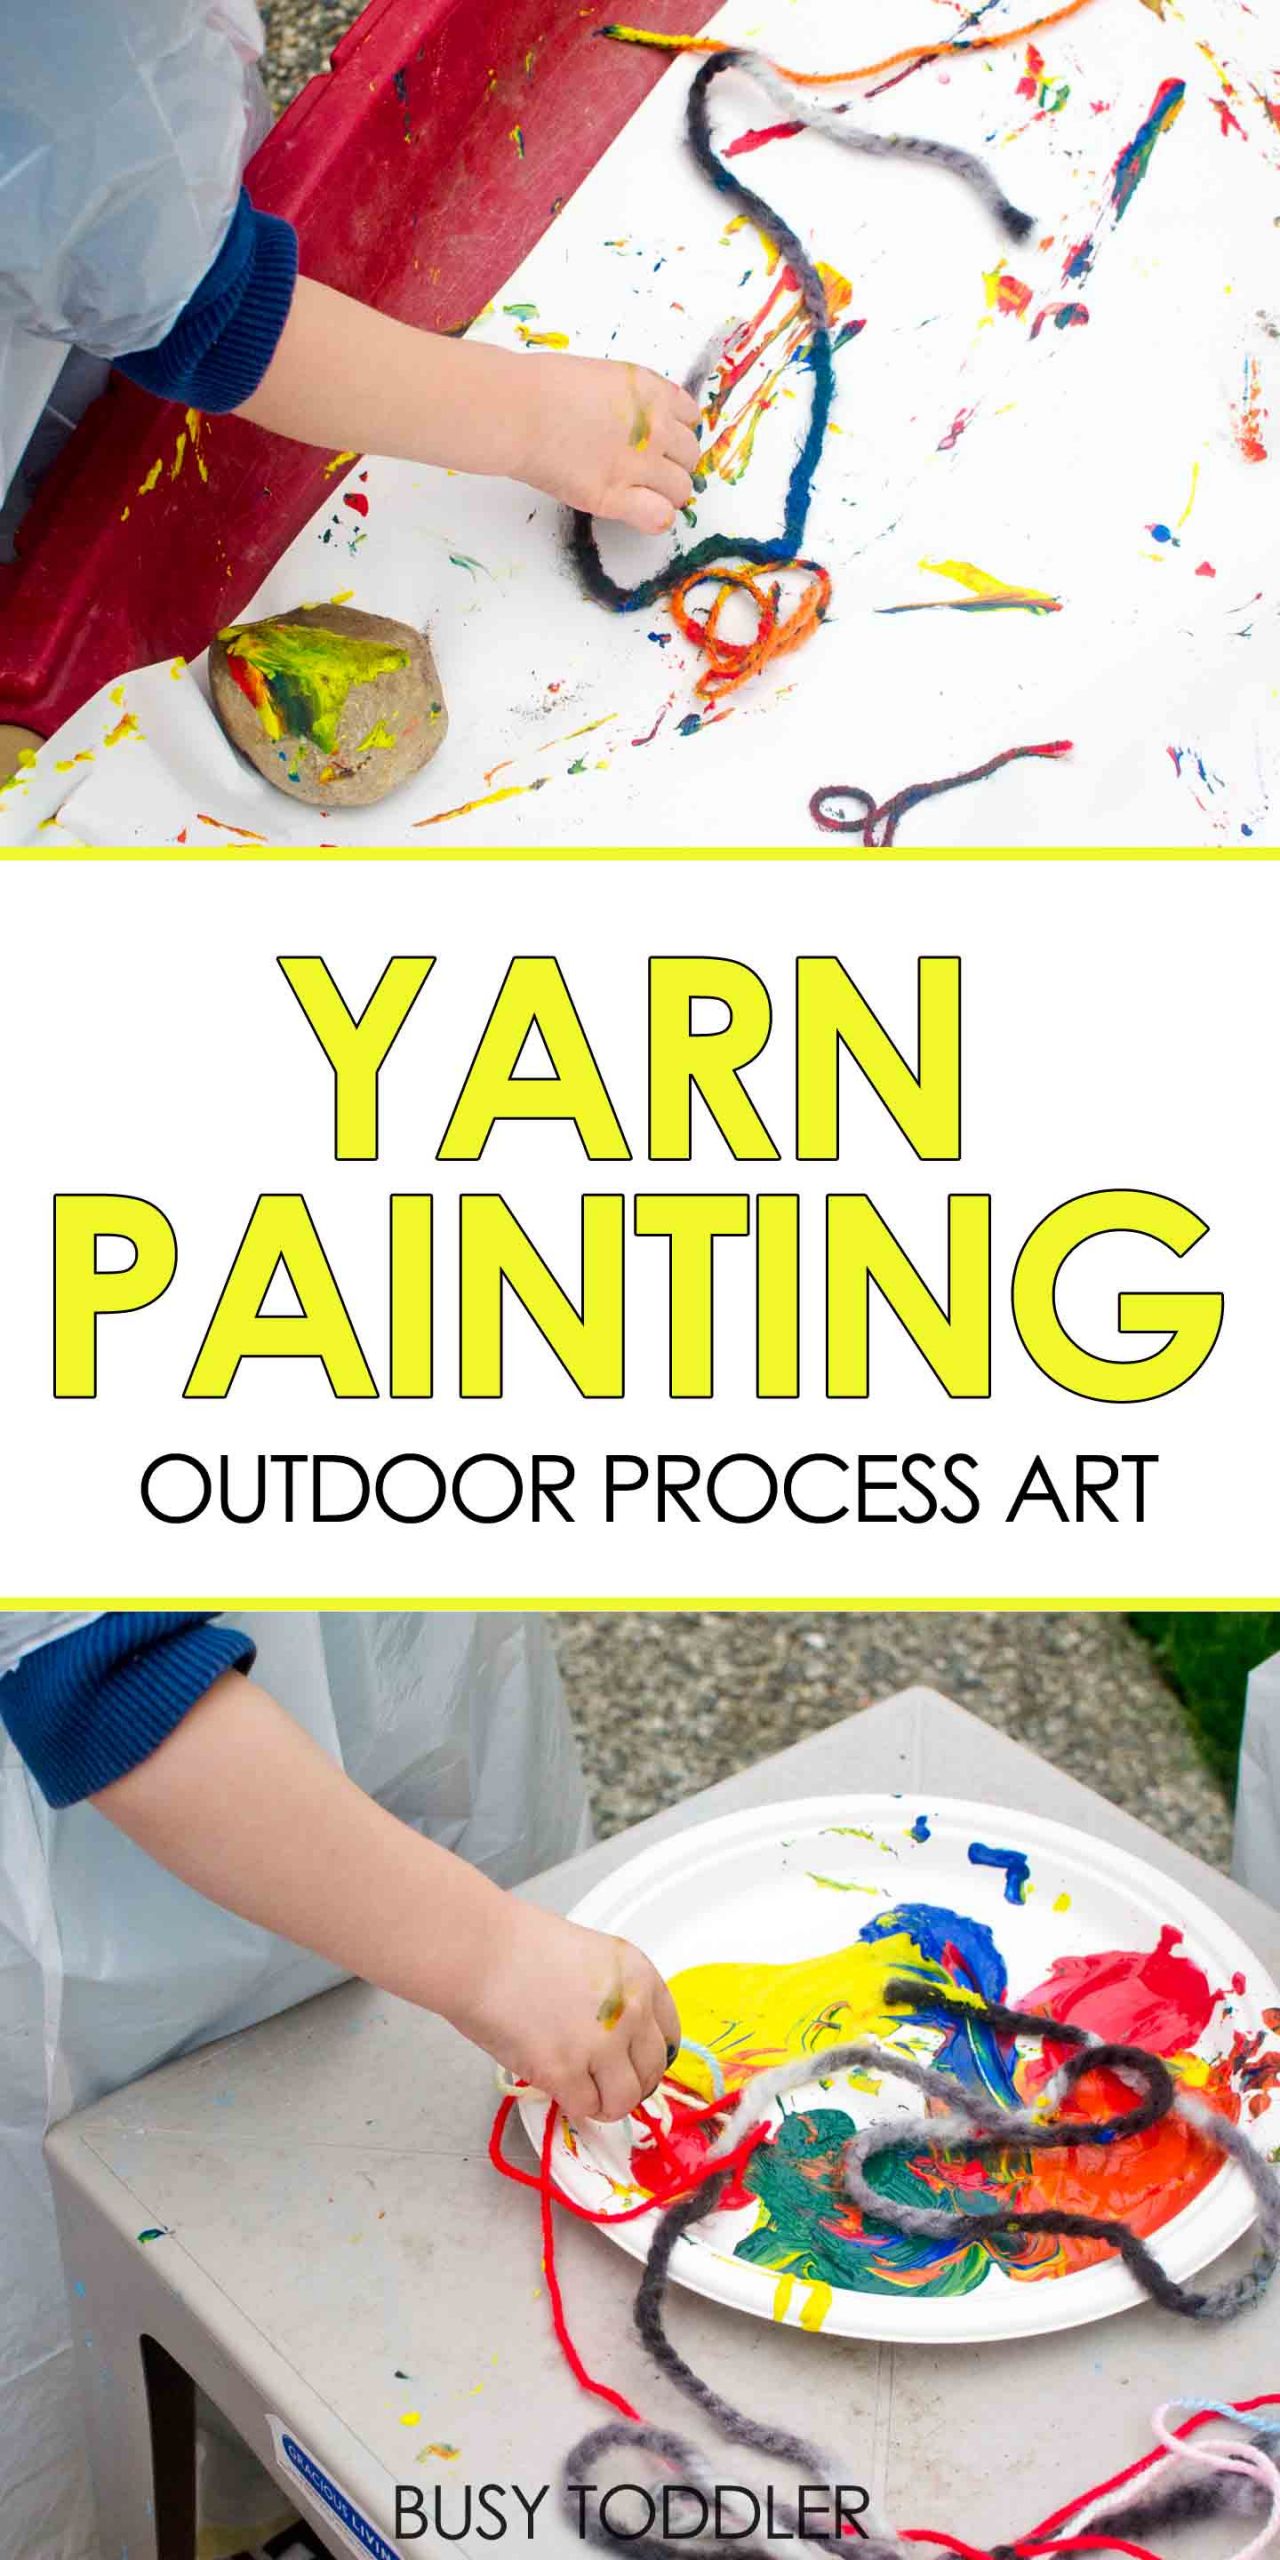 Summer Art Projects Preschool
 Yarn Painting Outdoor Process Art Busy Toddler